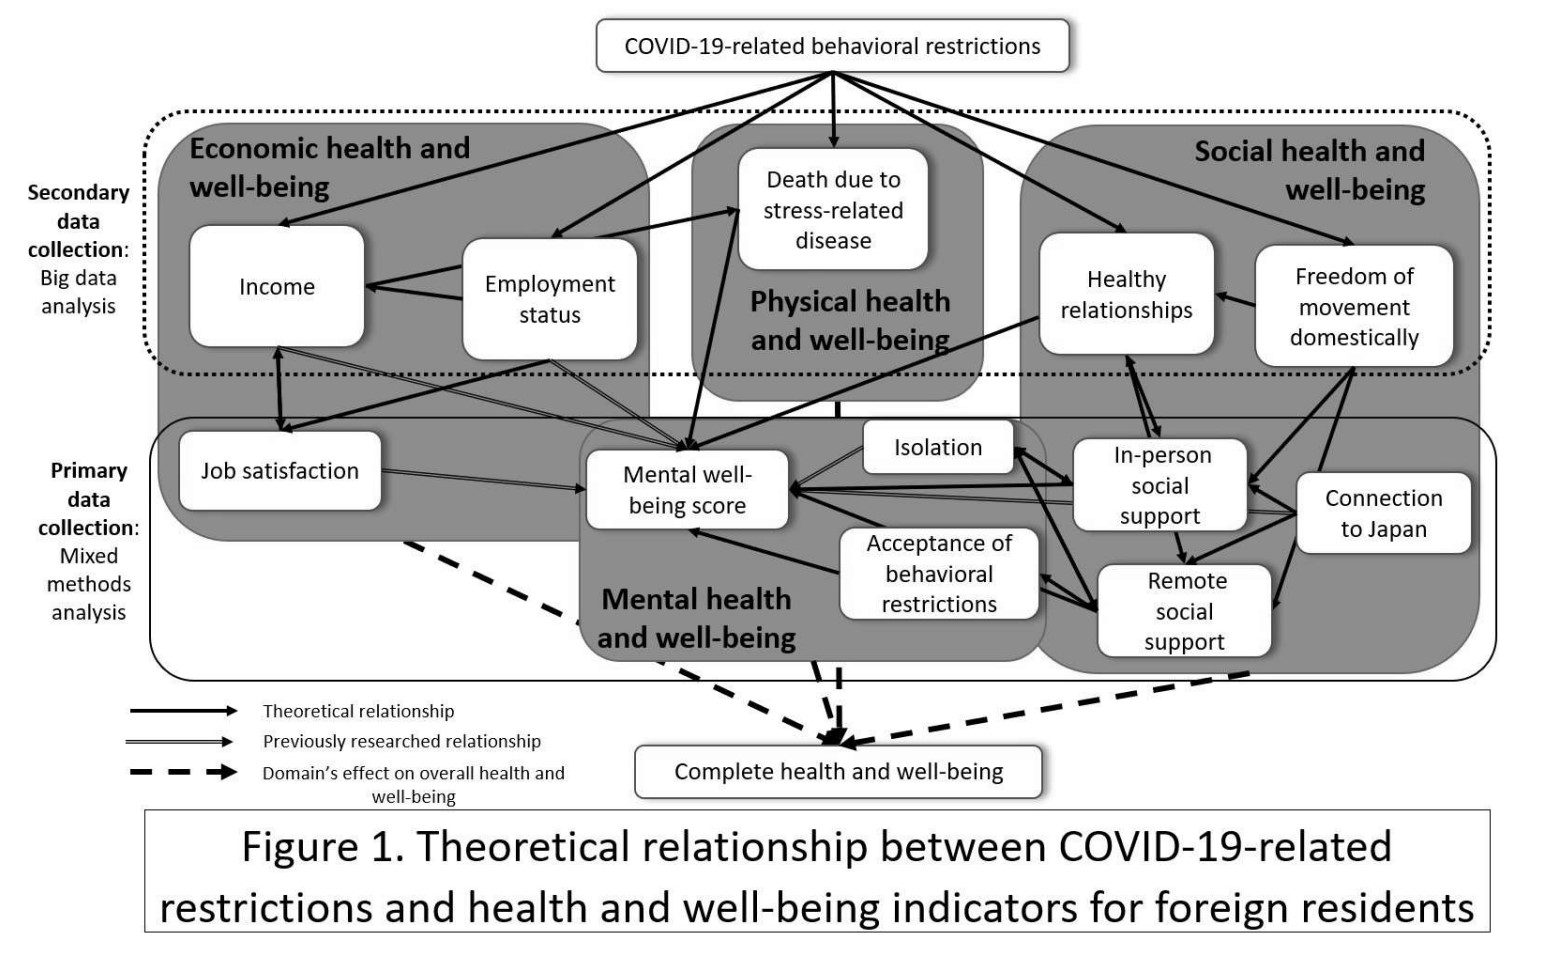 Theoretical relationship between COVID-19-related restrictions and health and well-being indicators for foreign residents